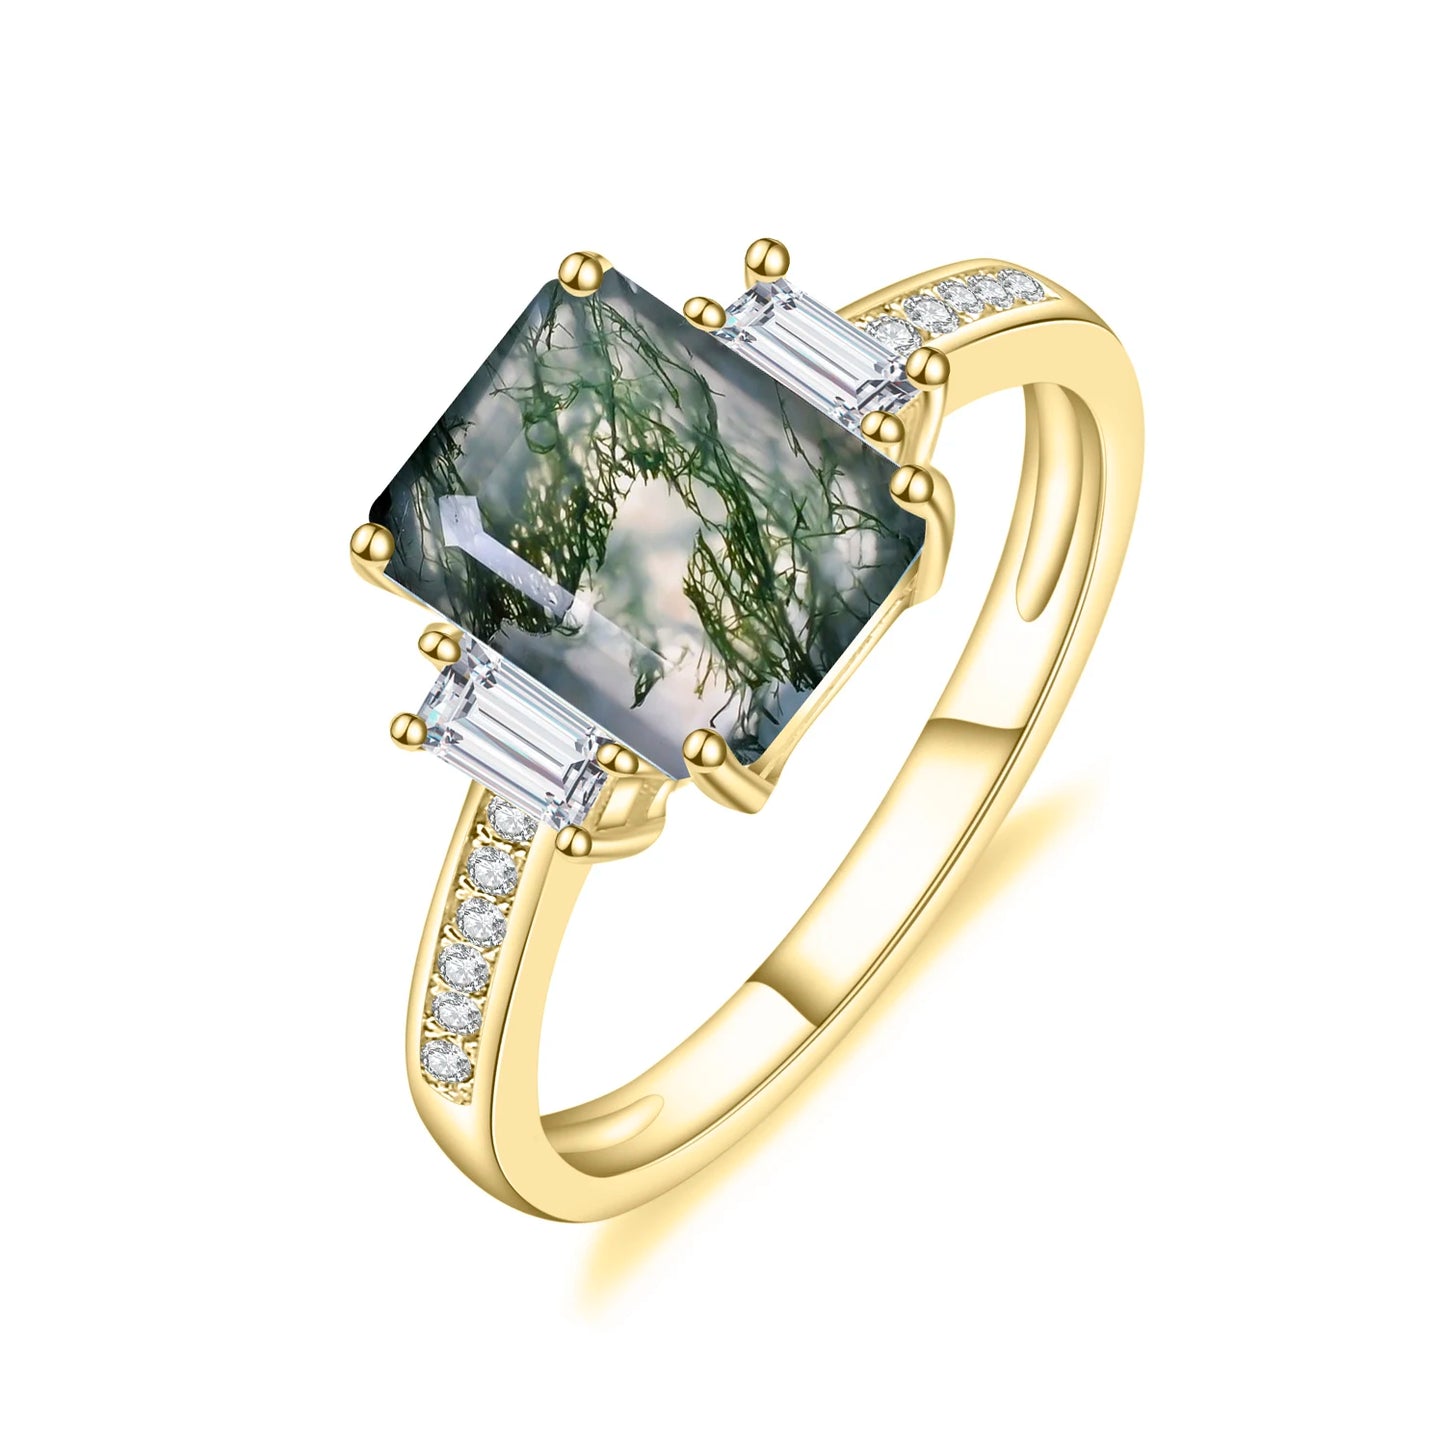 GEM'S BALLET Unique 2.38Ct 7x9mm Octagon Cut Moss Agate There Stone Engagement Ring in 925 Sterling Silver Women's Ring 925 Sterling Silver Moss Agate